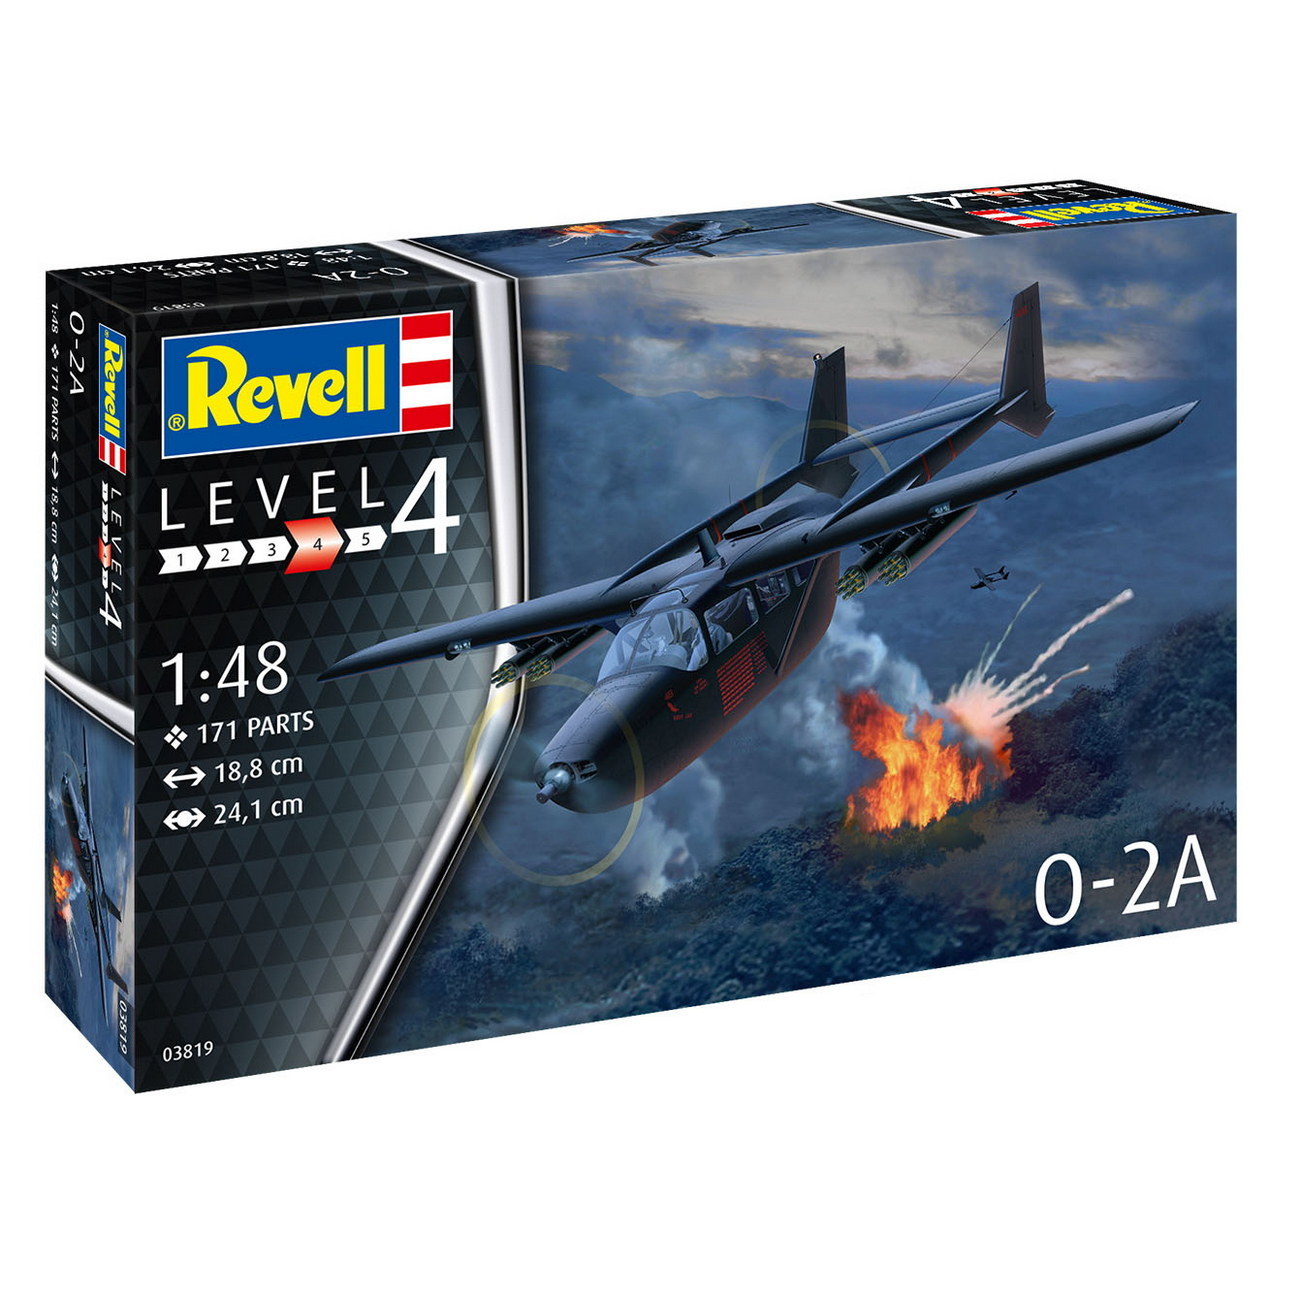 Revell 03819 - O-2A